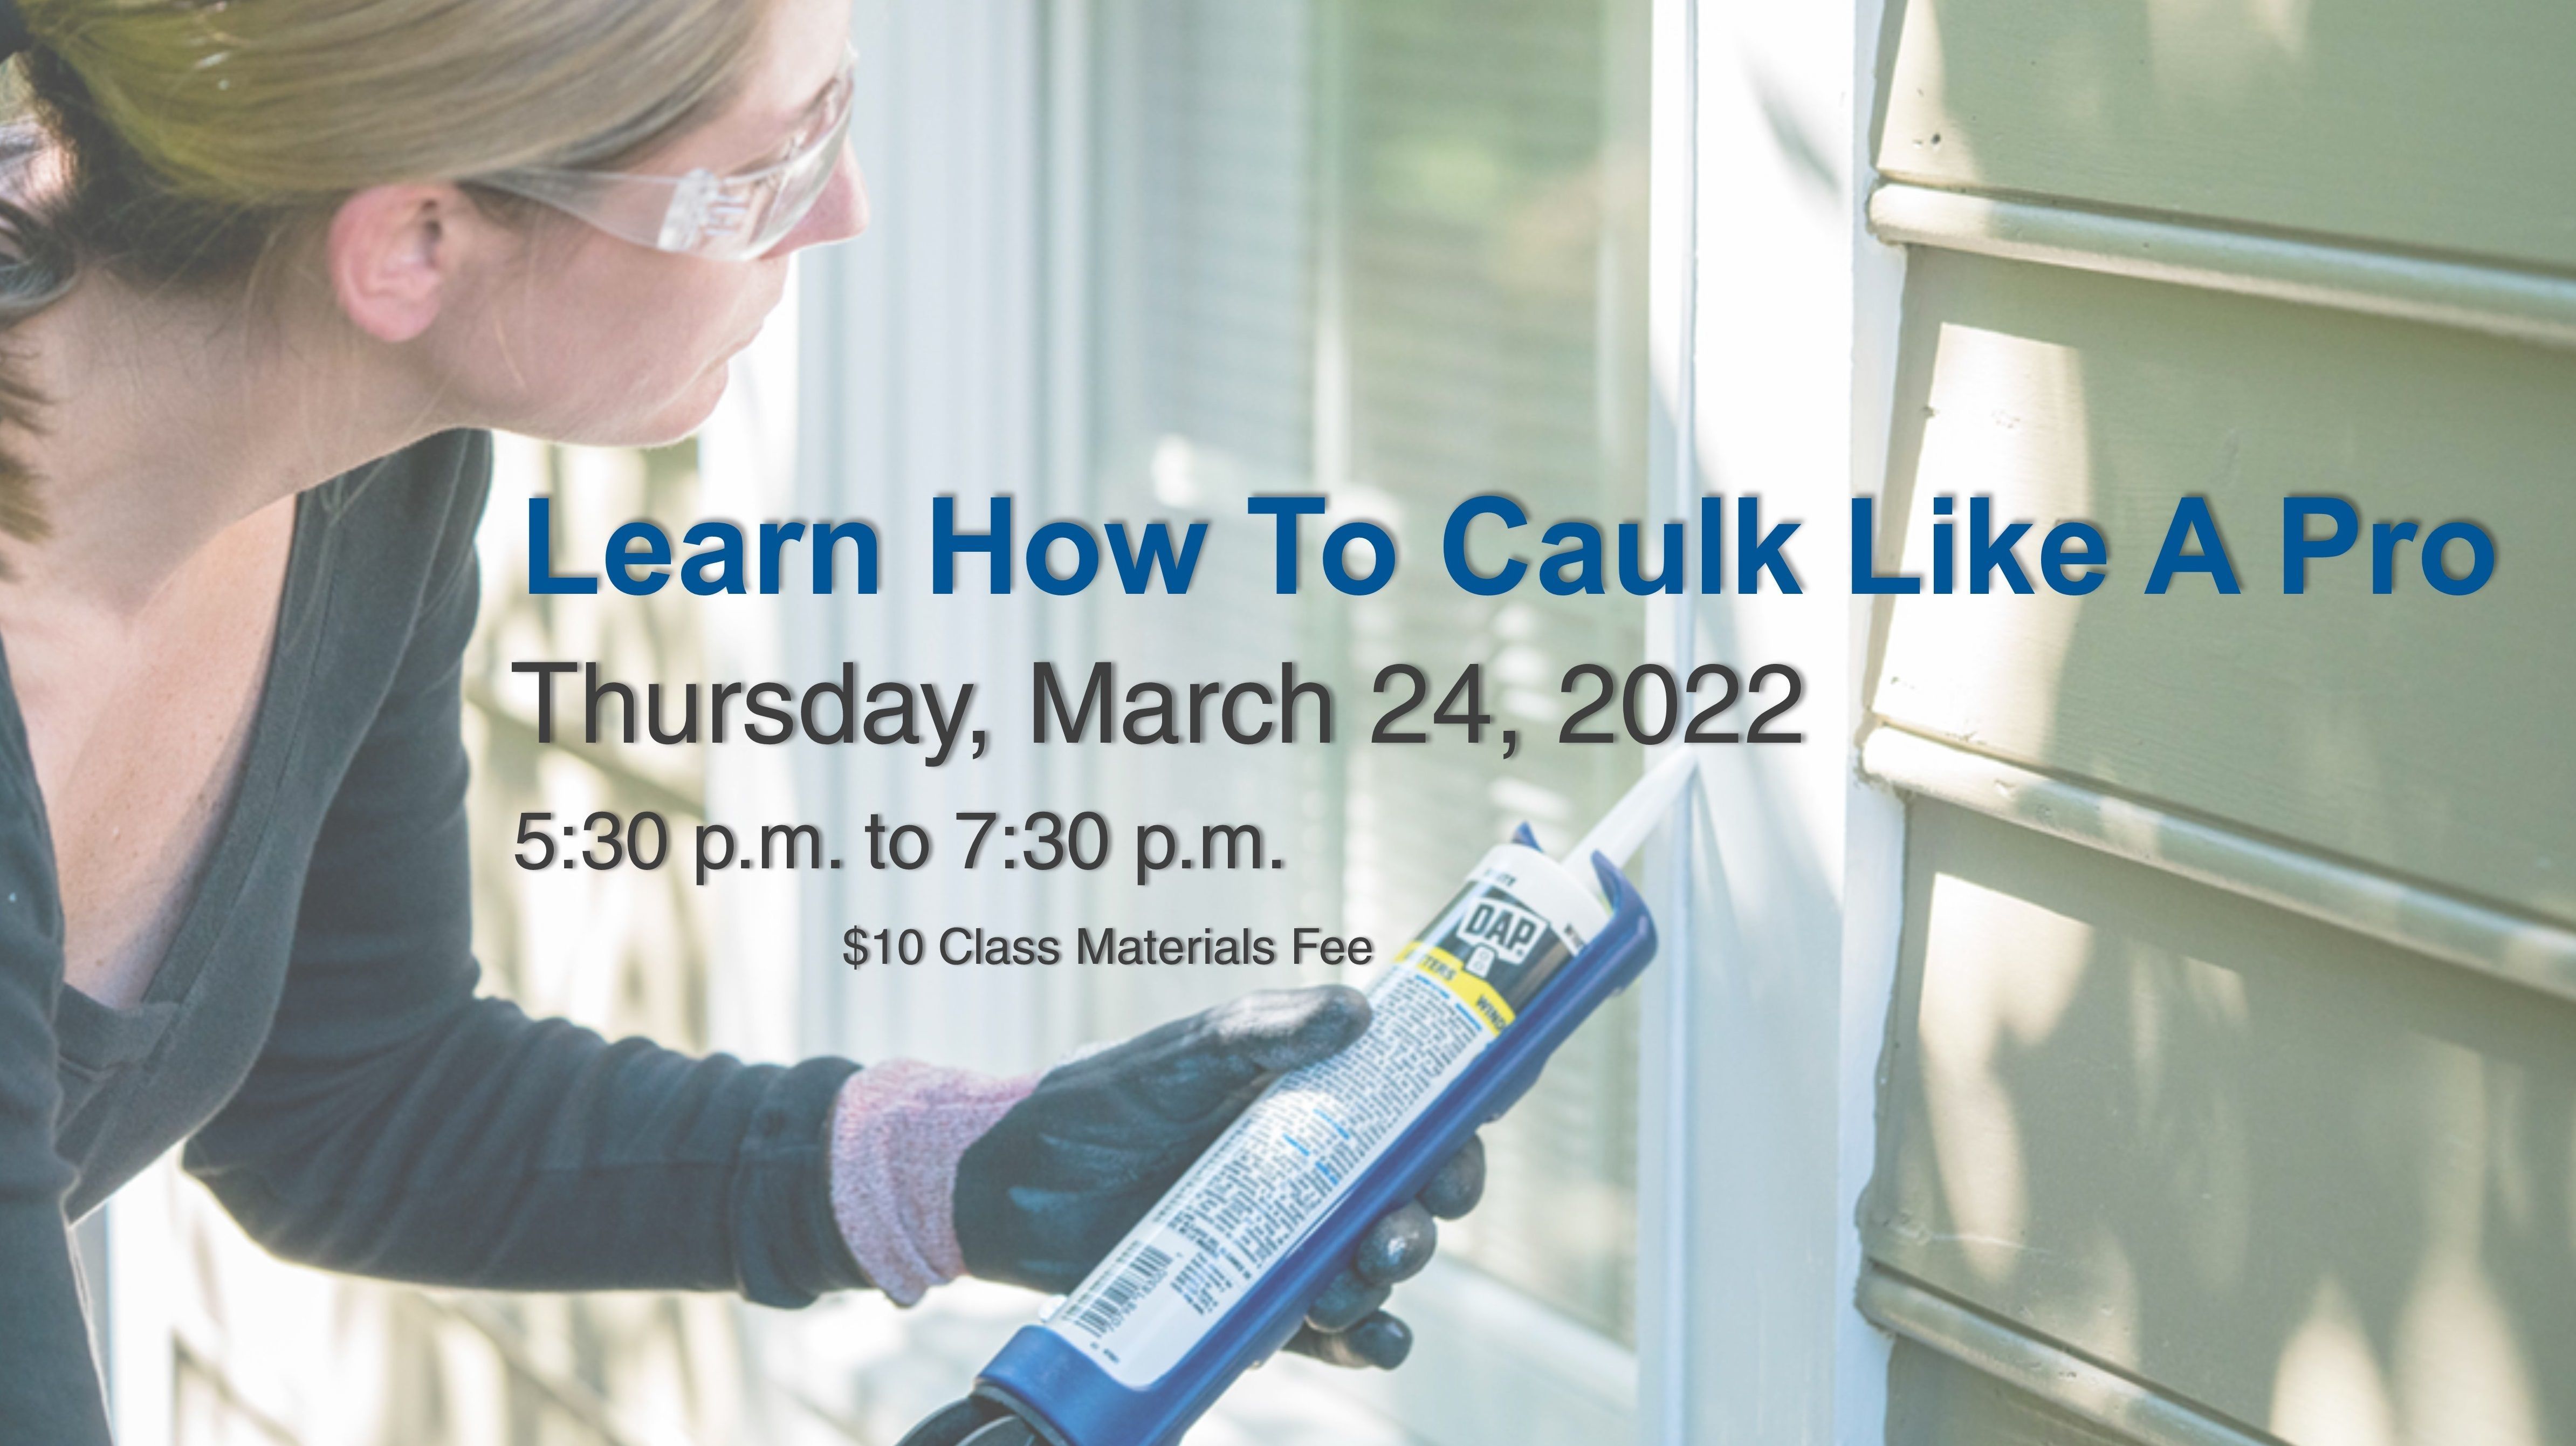 In this Master Homeowner Workshop, Darrin Huffman from Builder's First Source in Charleston, will teach you a vital skill needed to maintain your home for life.